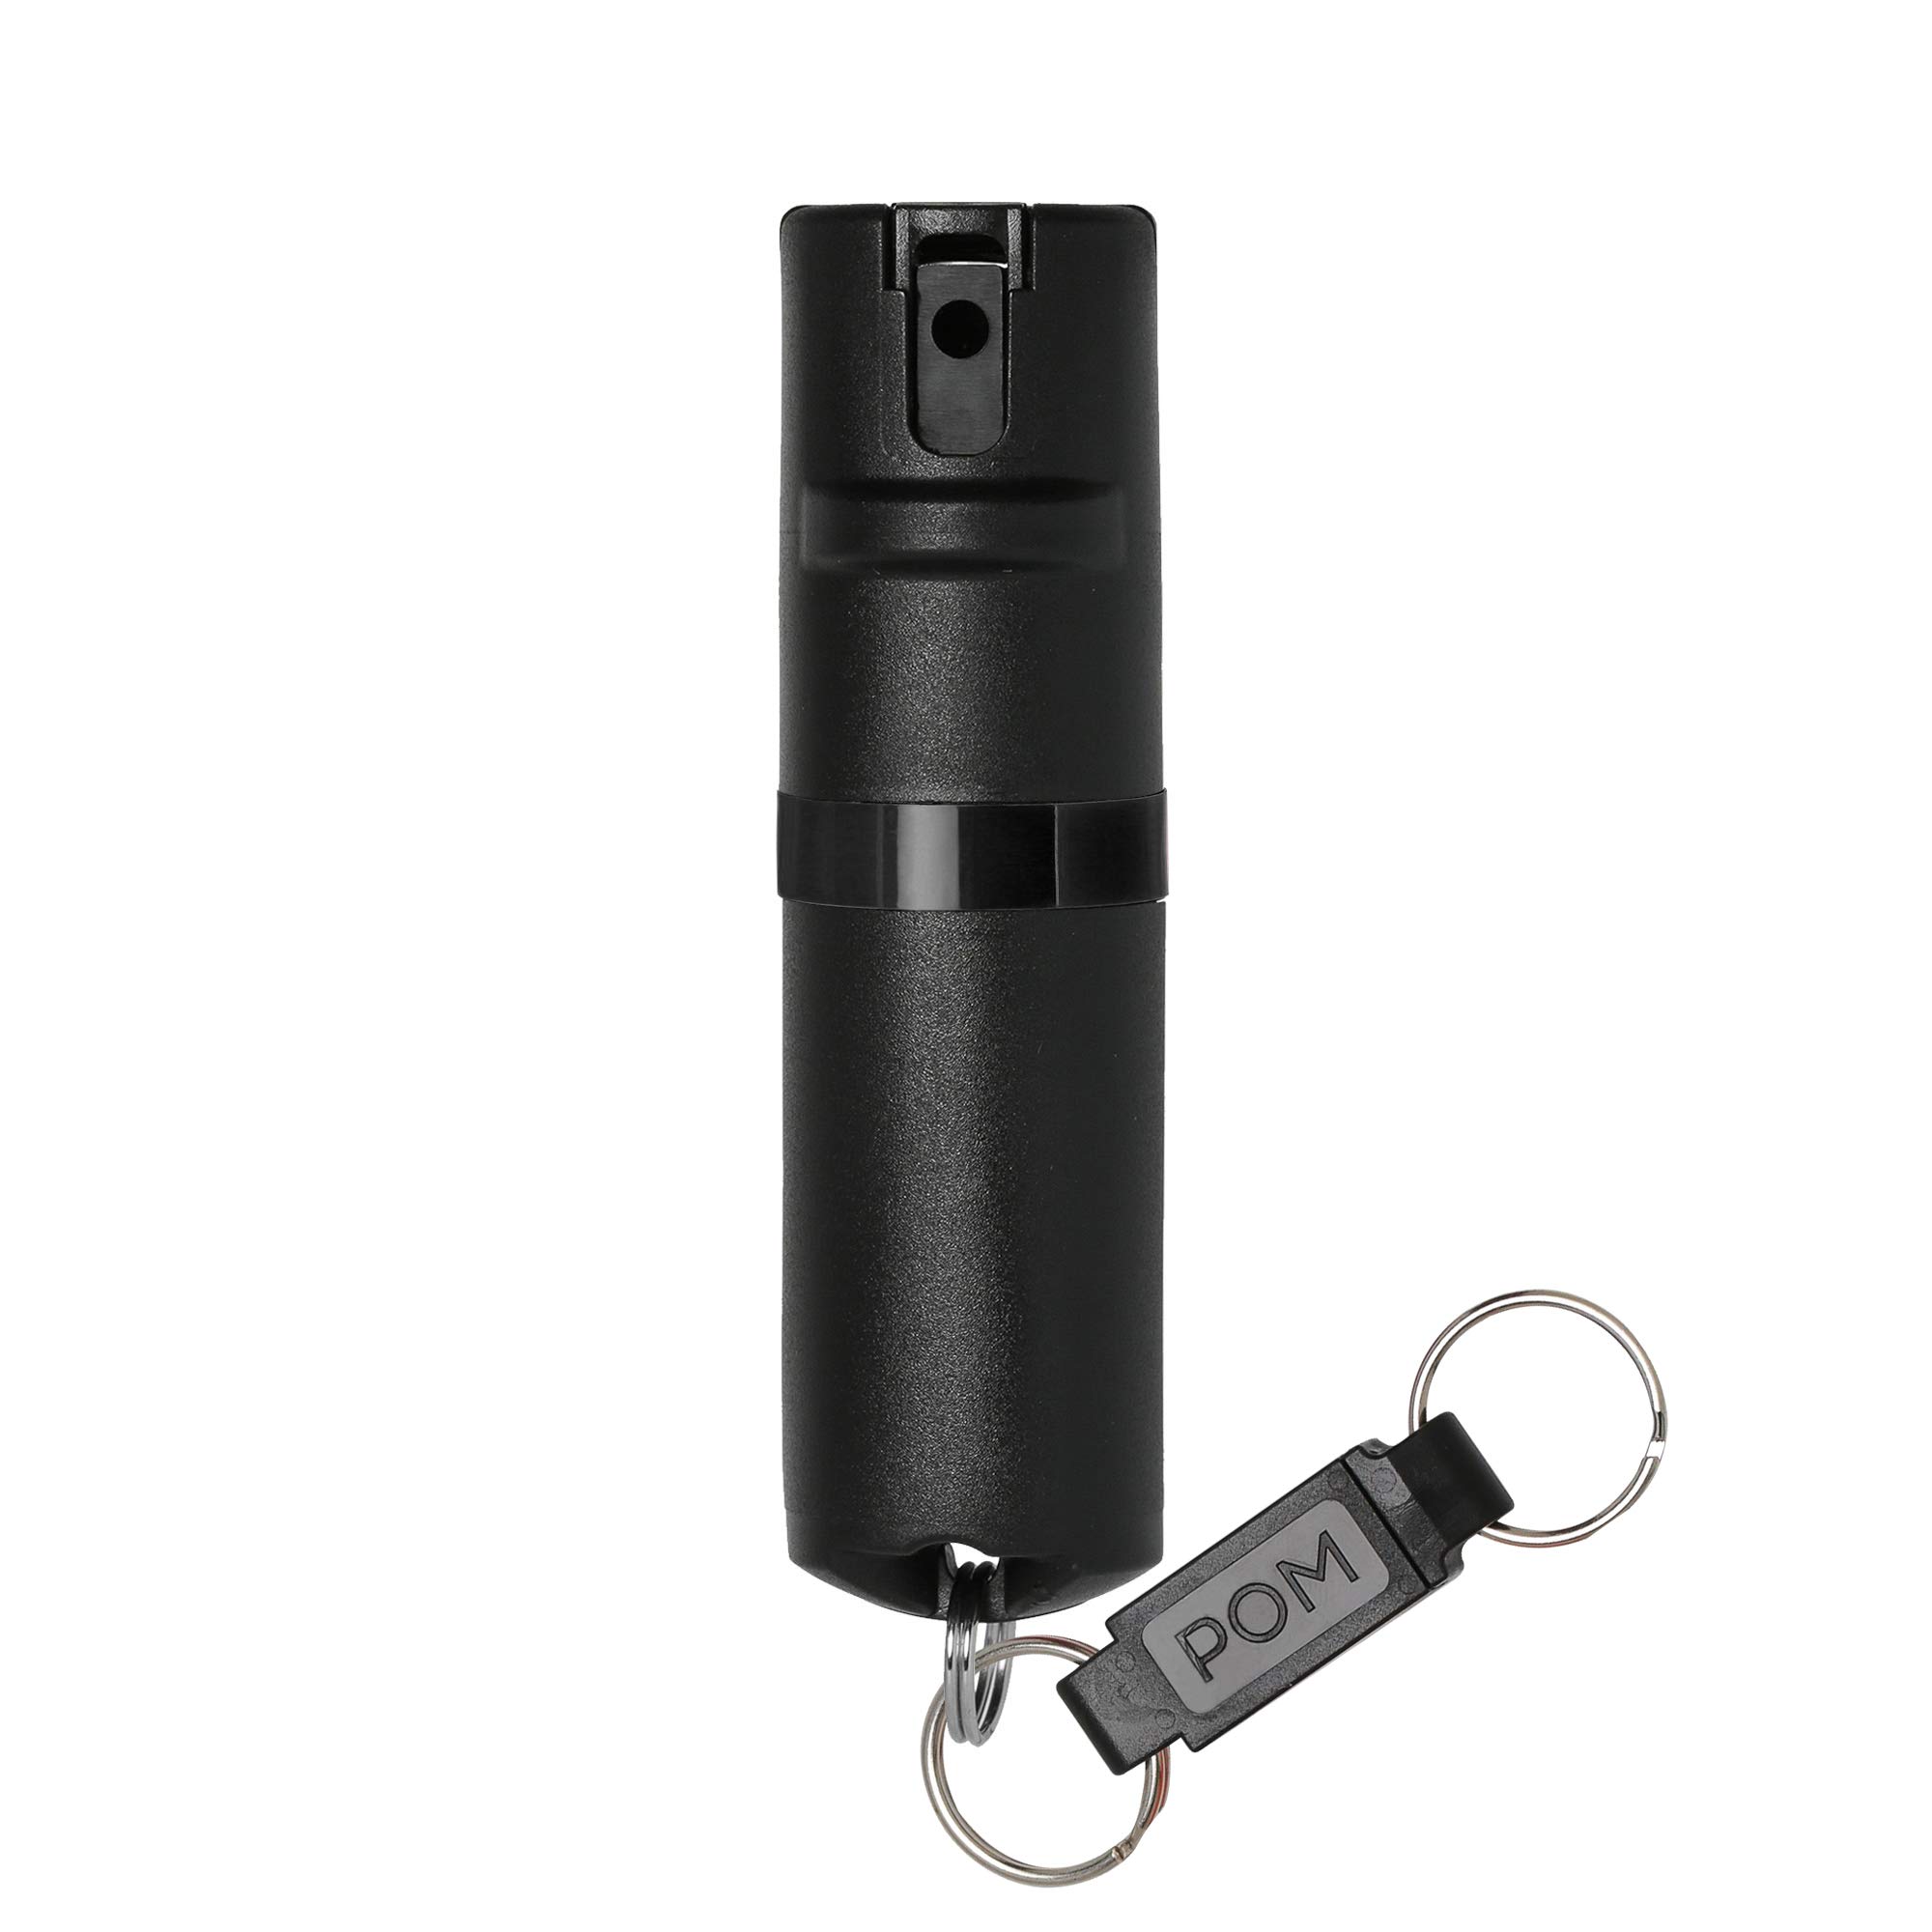 POM Pepper Spray Flip Top Keychain - Maximum Strength OC Spray Self Defense  - Tactical Compact & Safe Design - Quick Key Release - 25 Bursts & 10 ft  Range - Accurate Stream Pattern Black and Black